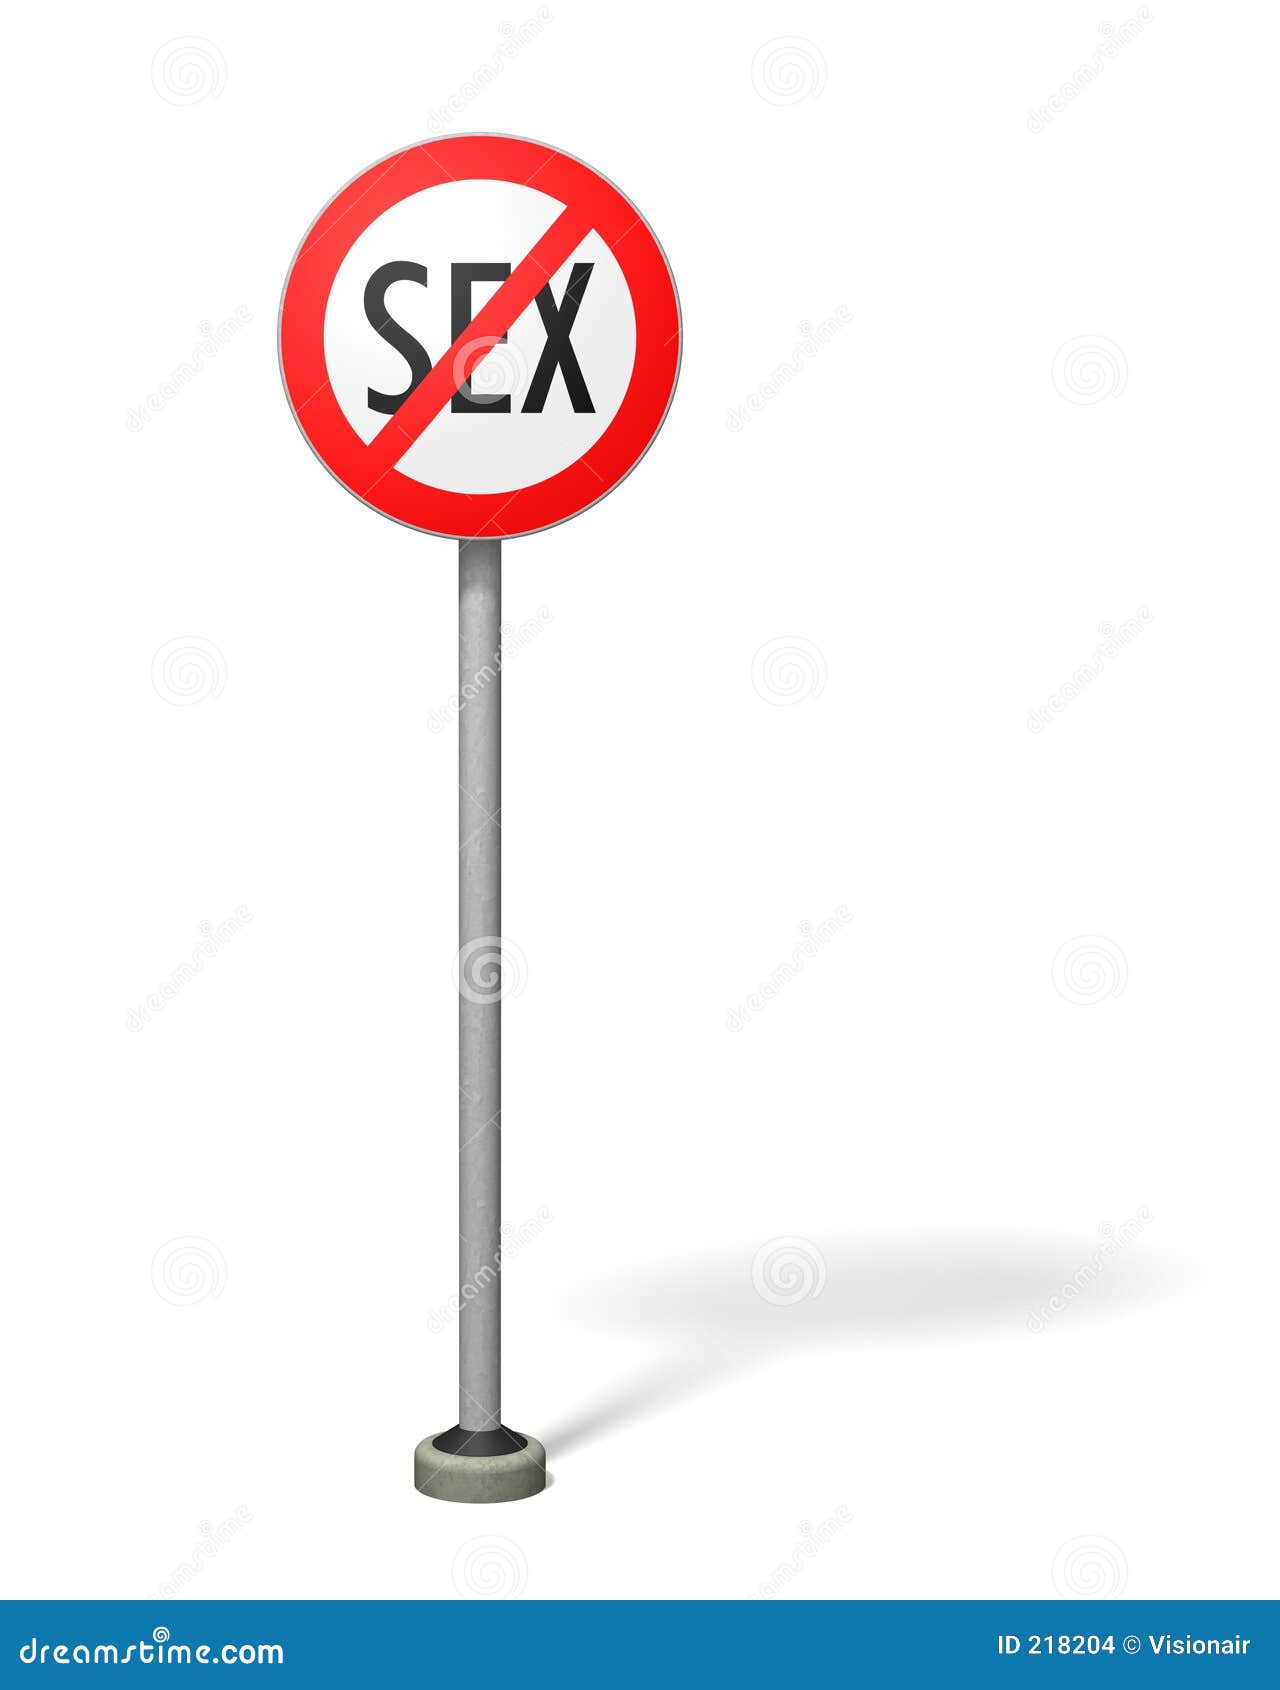 Sex Free Zone Stock Images Image 218204